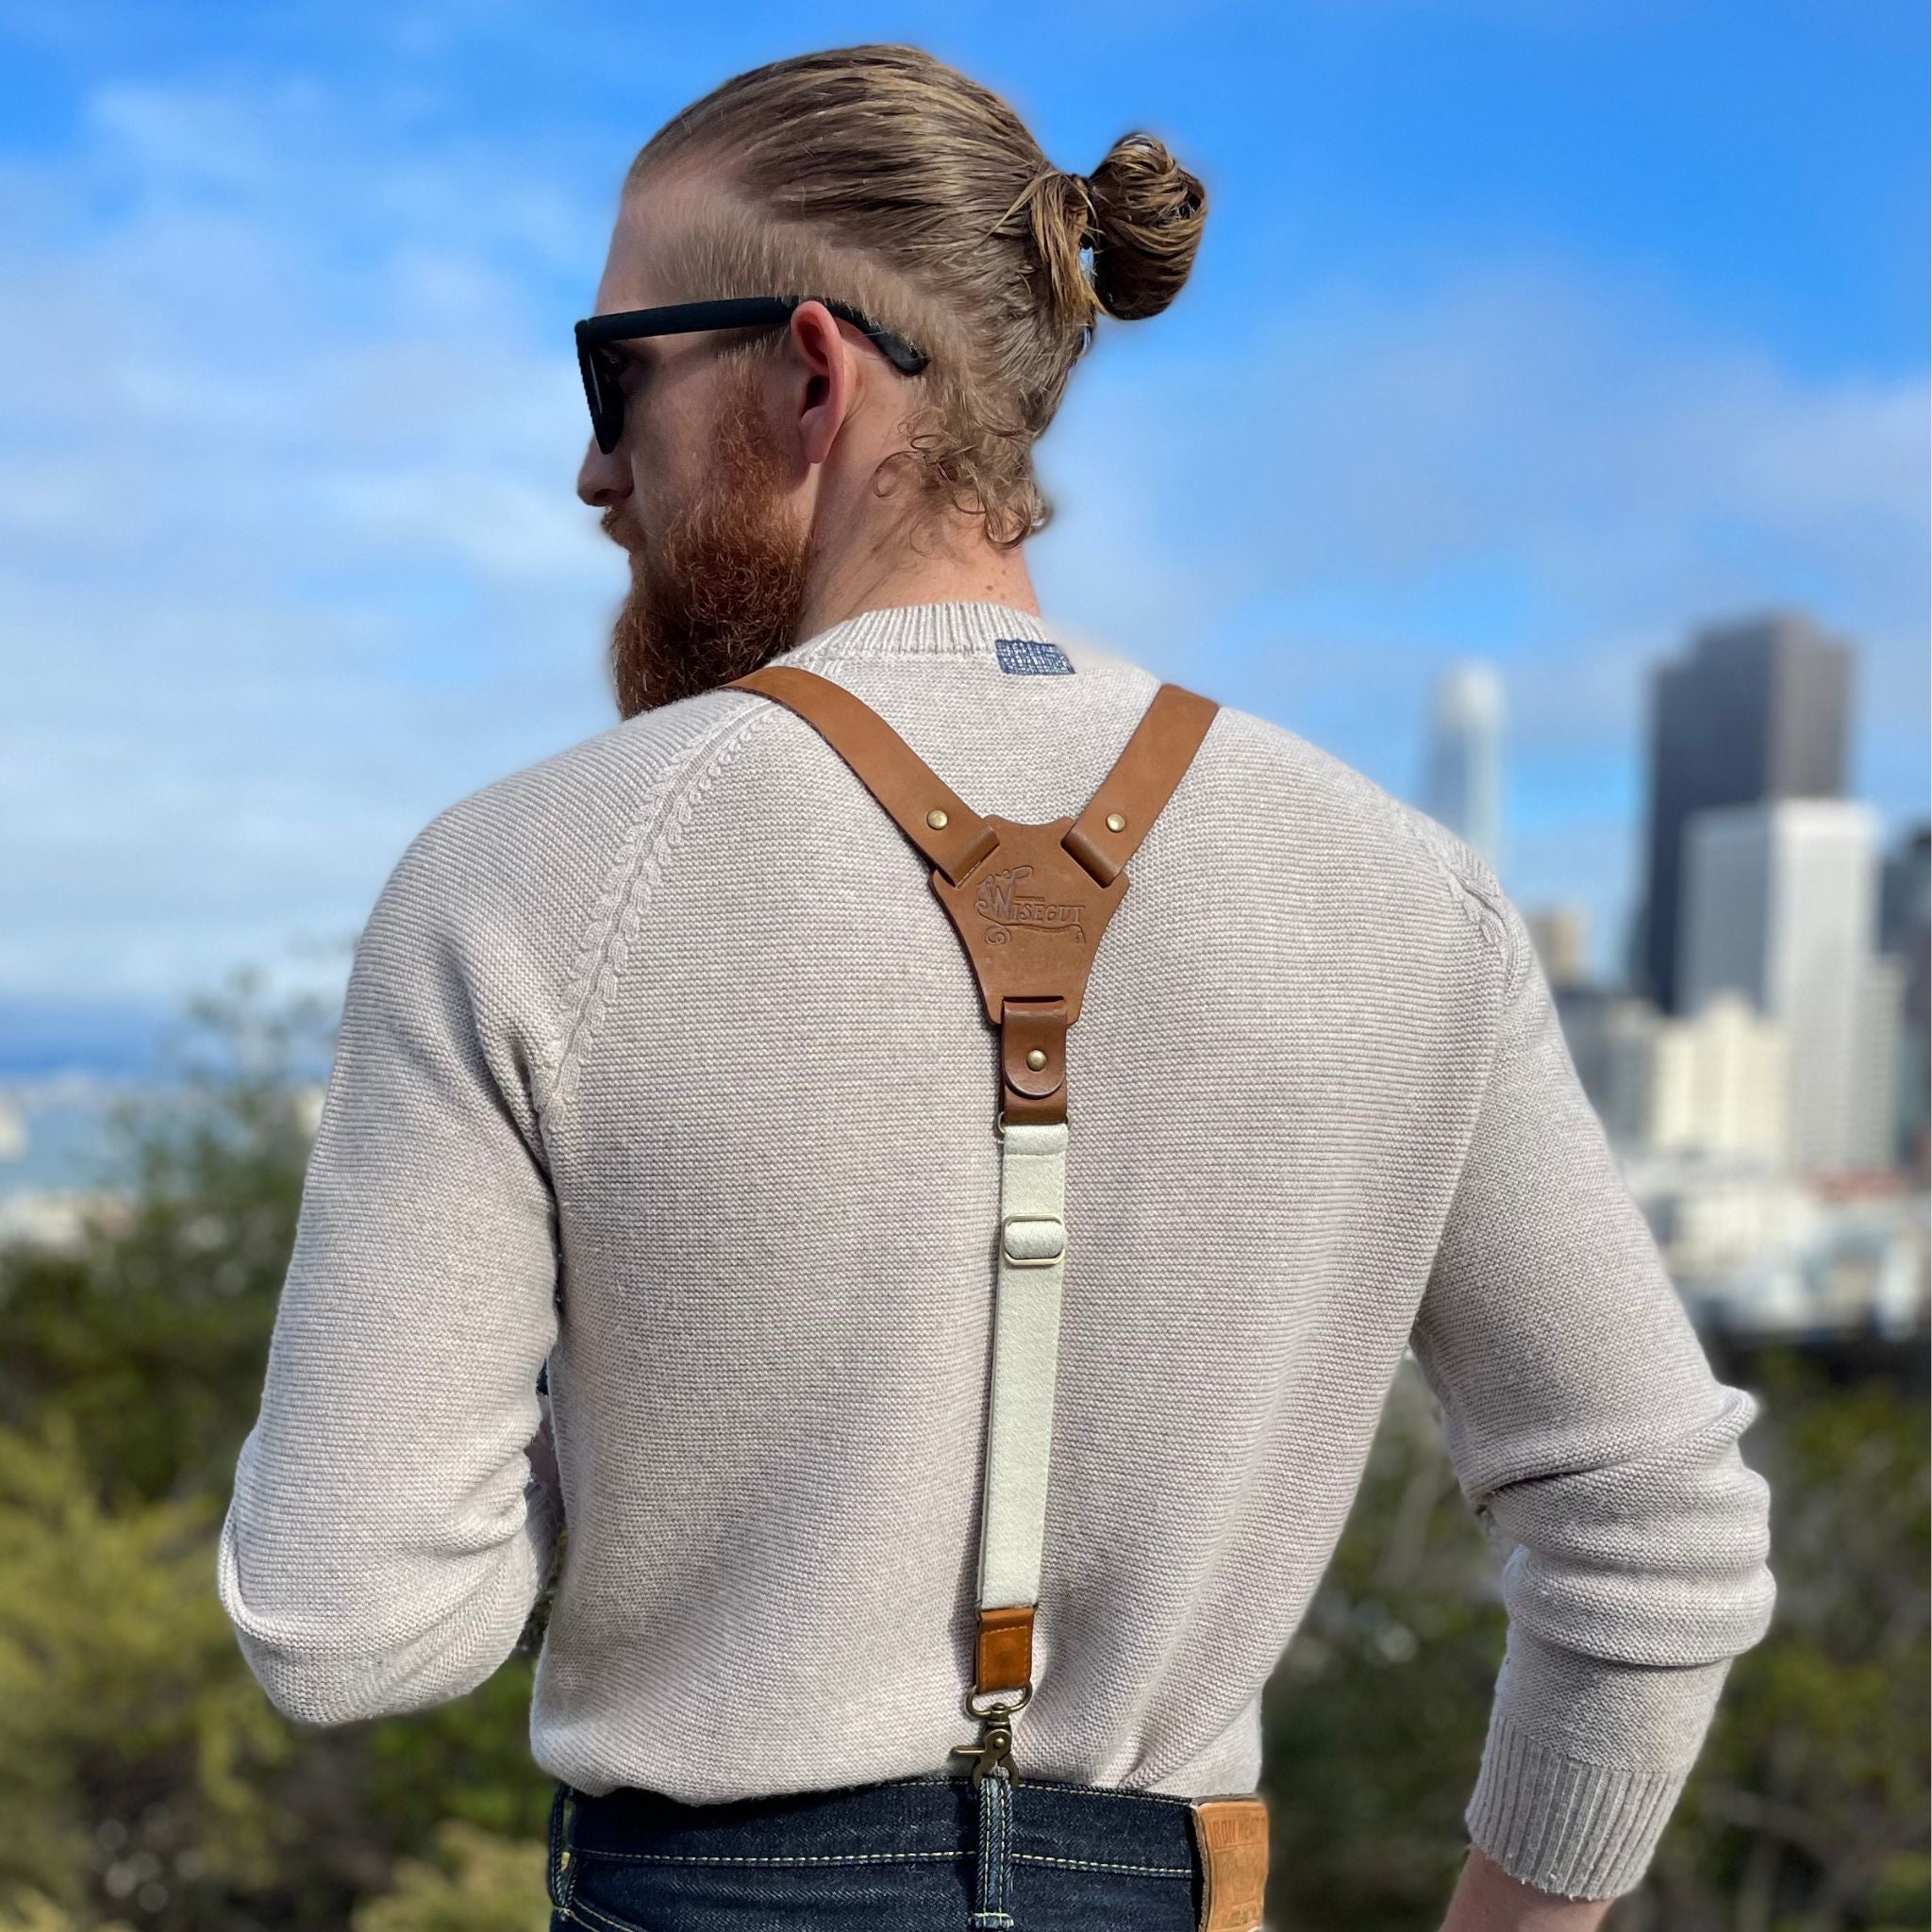 Man photo from the back with skyline in the background. He is wearing Suspenders and has his hair in a bun.